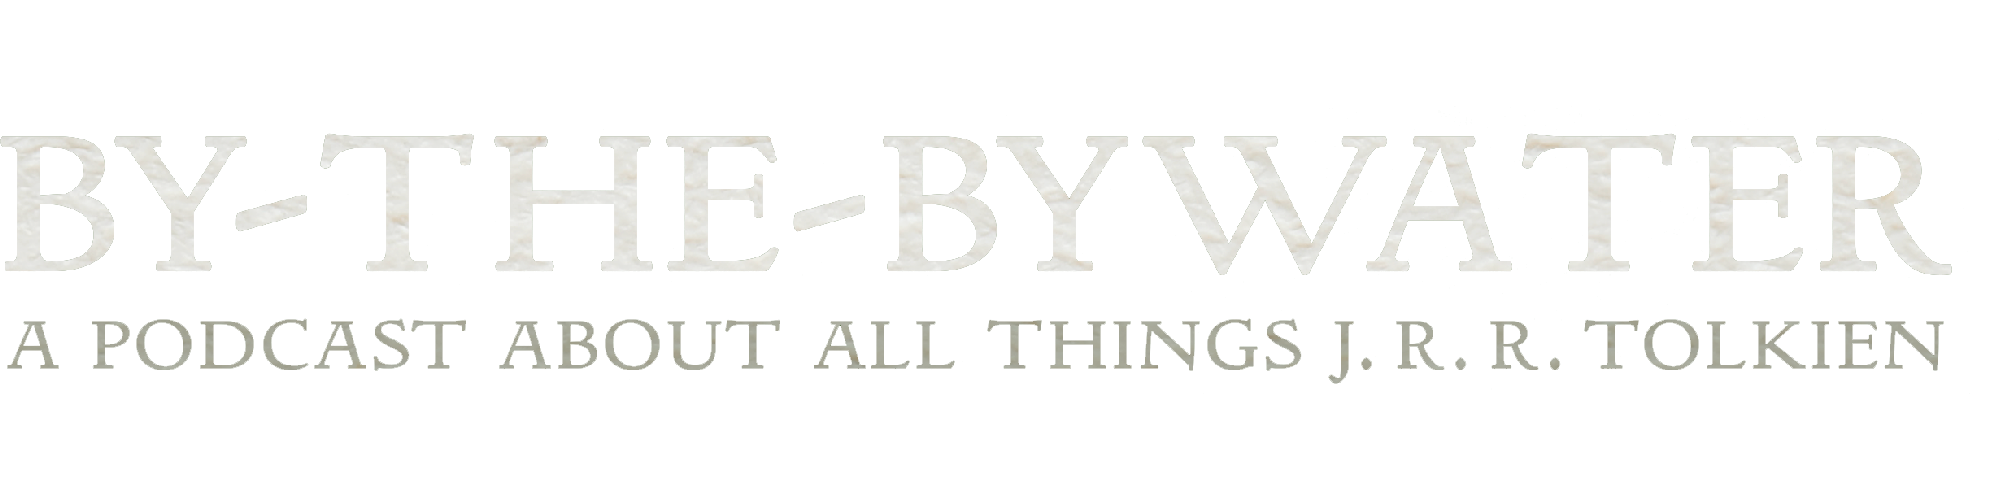 By-The-Bywater: A Podcast about All Things J.R.R. Tolkien